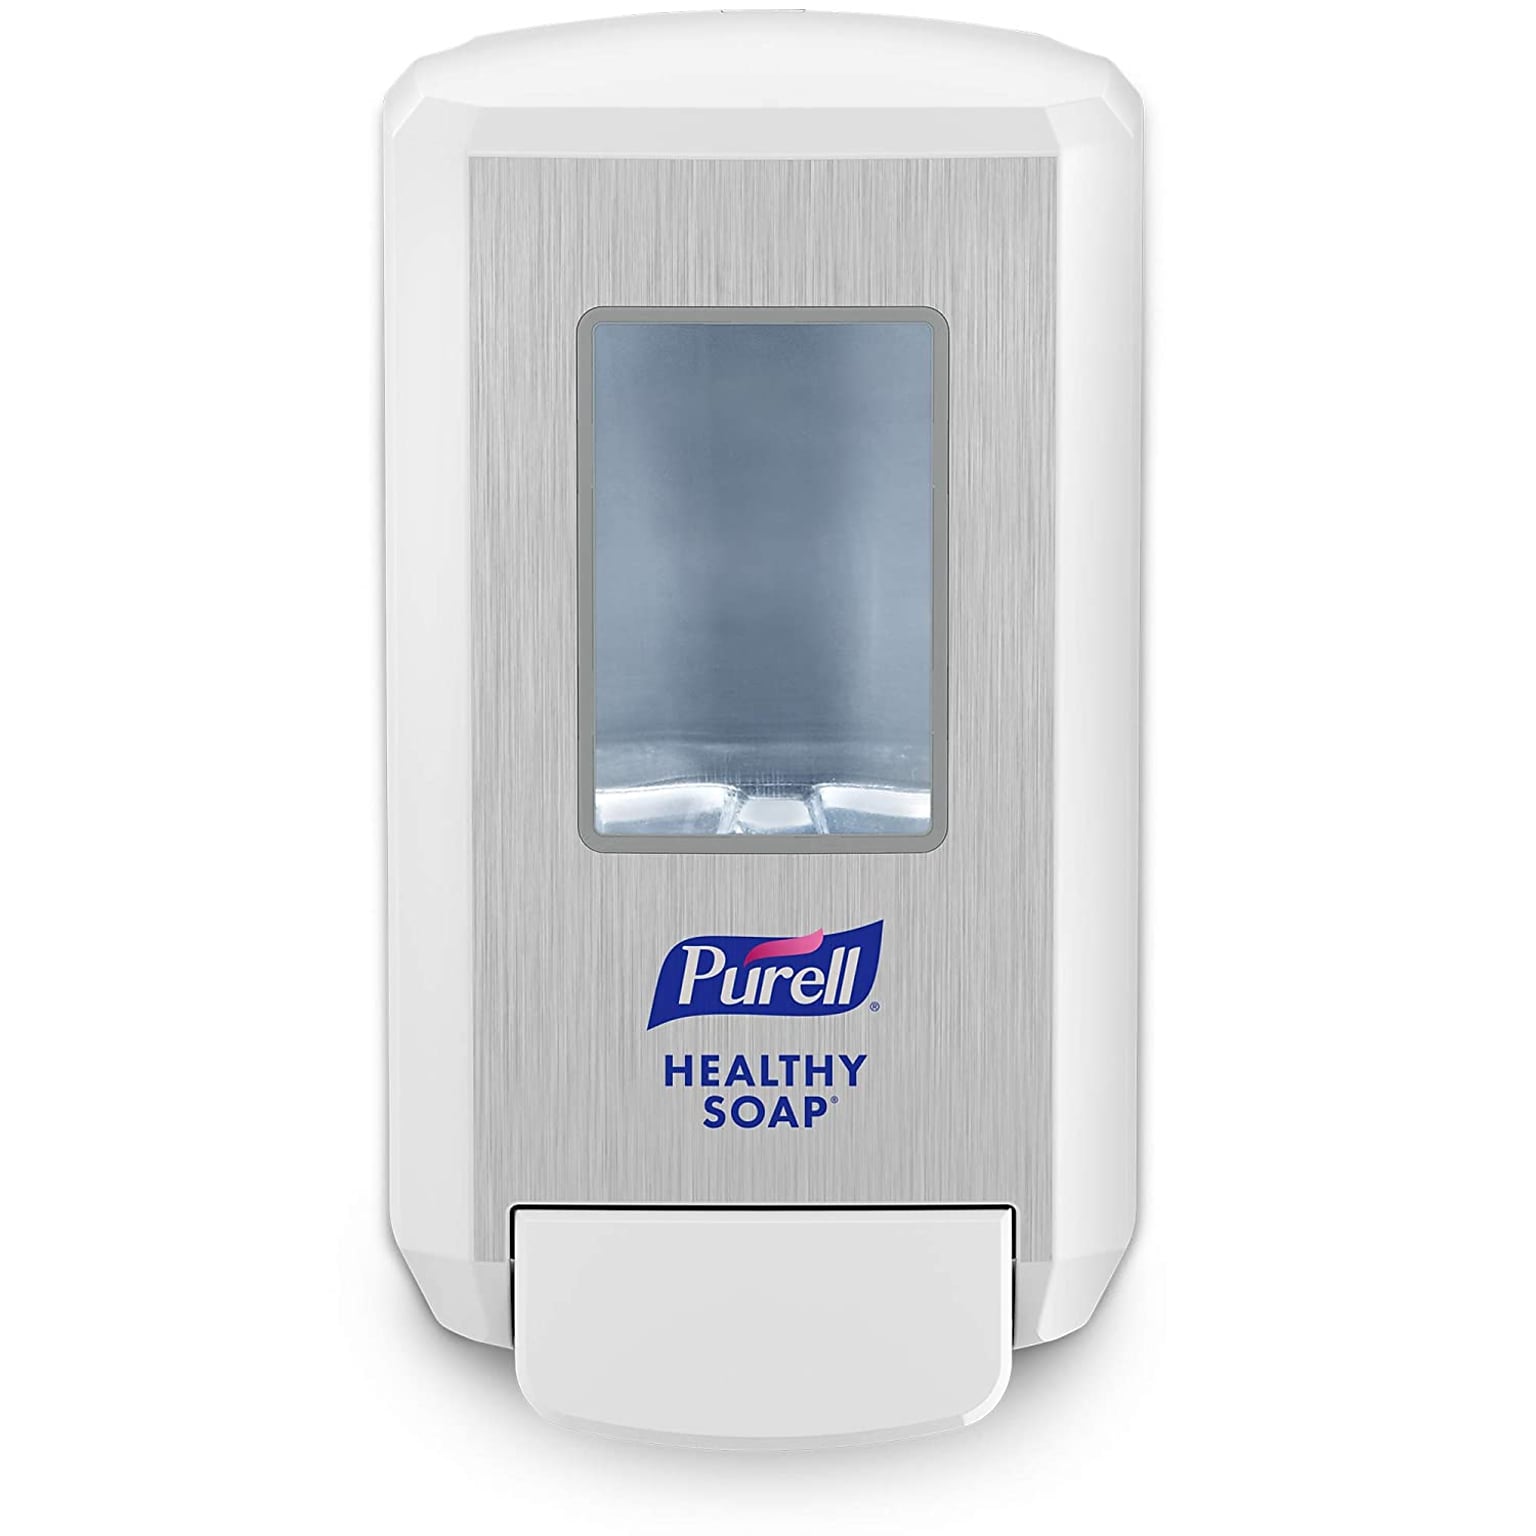 GOJO FMX-20 FMX Wall Mounted Hand Soap Dispenser, White/Gray (5270-06)